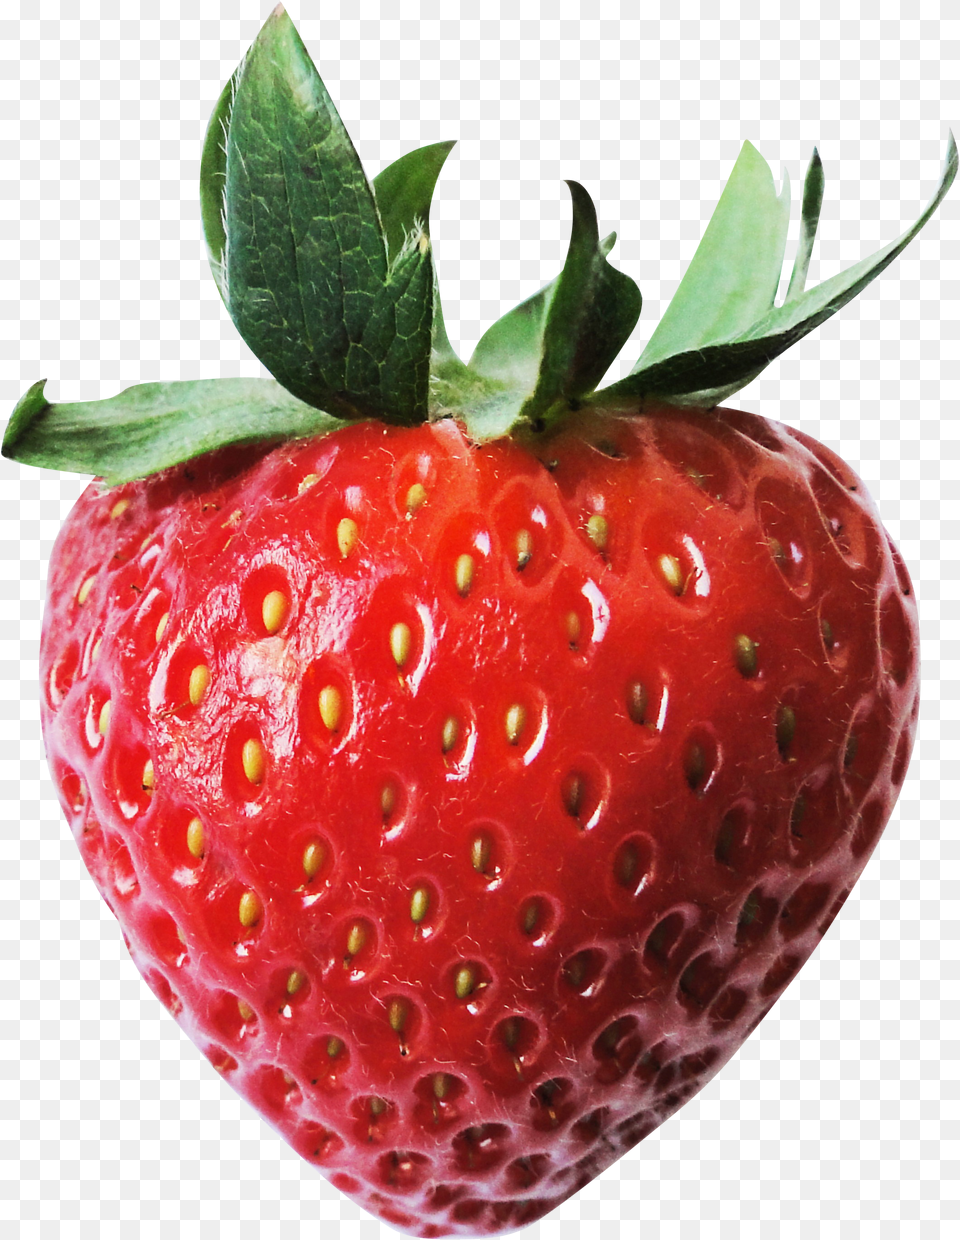 Download Red Juicy Strawberry Image People See Different Colors Free Transparent Png